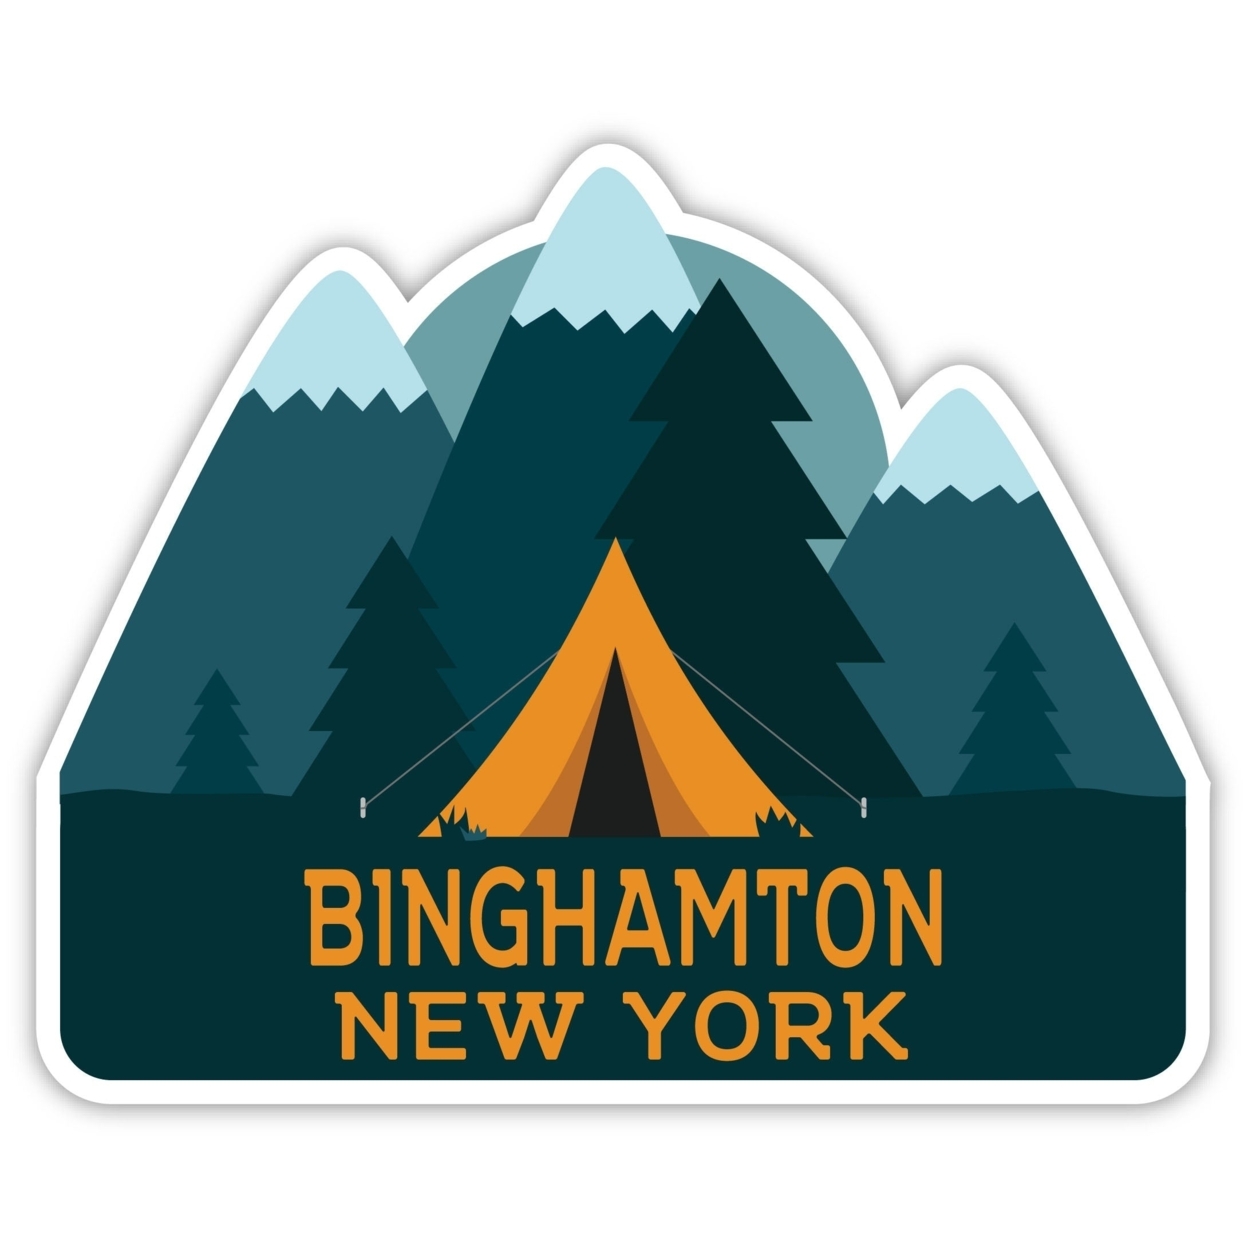 Binghamton New York Souvenir Decorative Stickers (Choose Theme And Size) - 4-Pack, 2-Inch, Tent